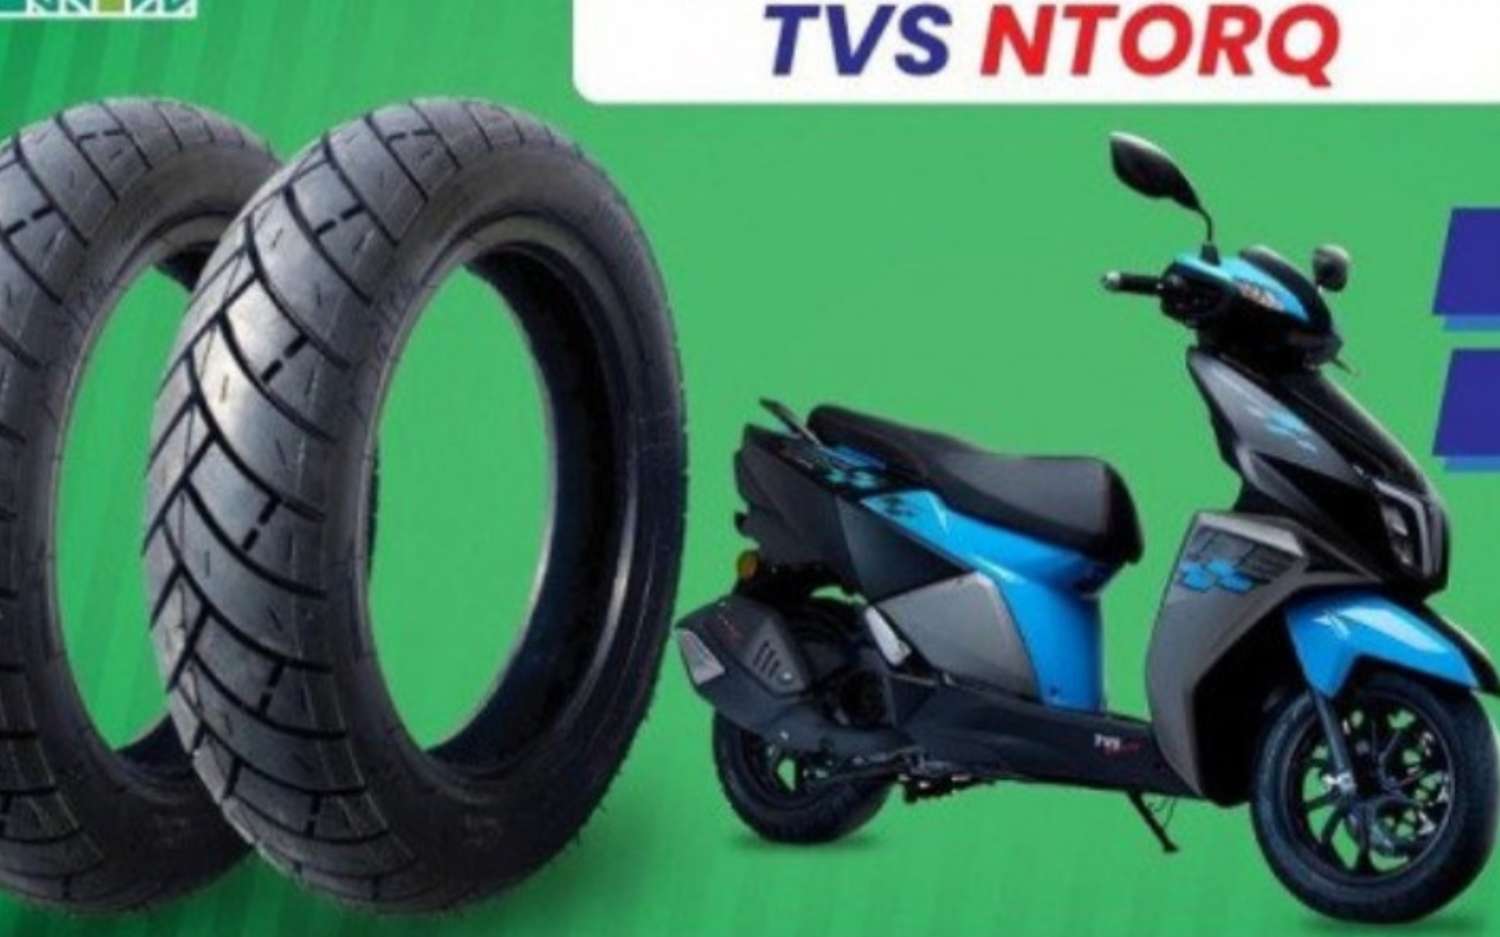 Green Tyre Launches Production of 'Delta' Brand Tyres for TVS NTORQ Scooters